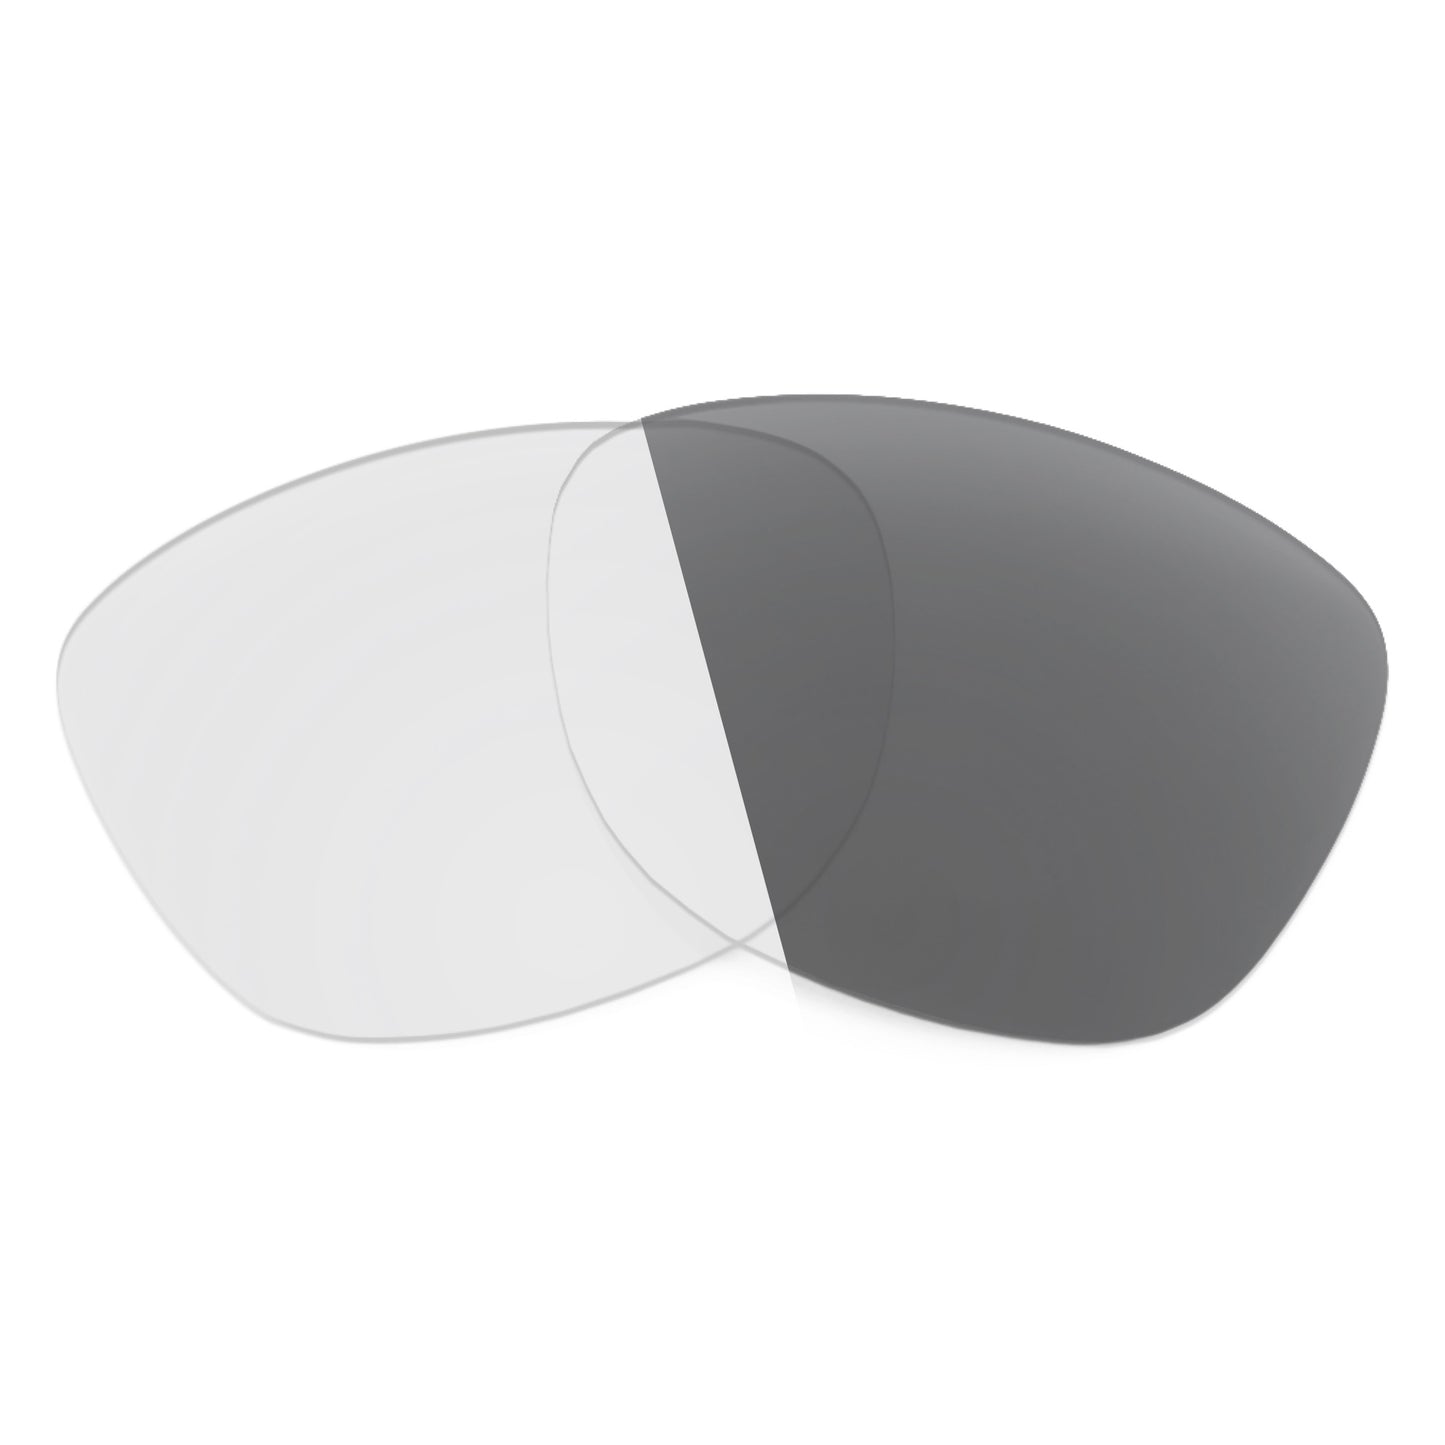 Revant replacement lenses for Ray-Ban RB4285 55mm Non-Polarized Adapt Gray Photochromic